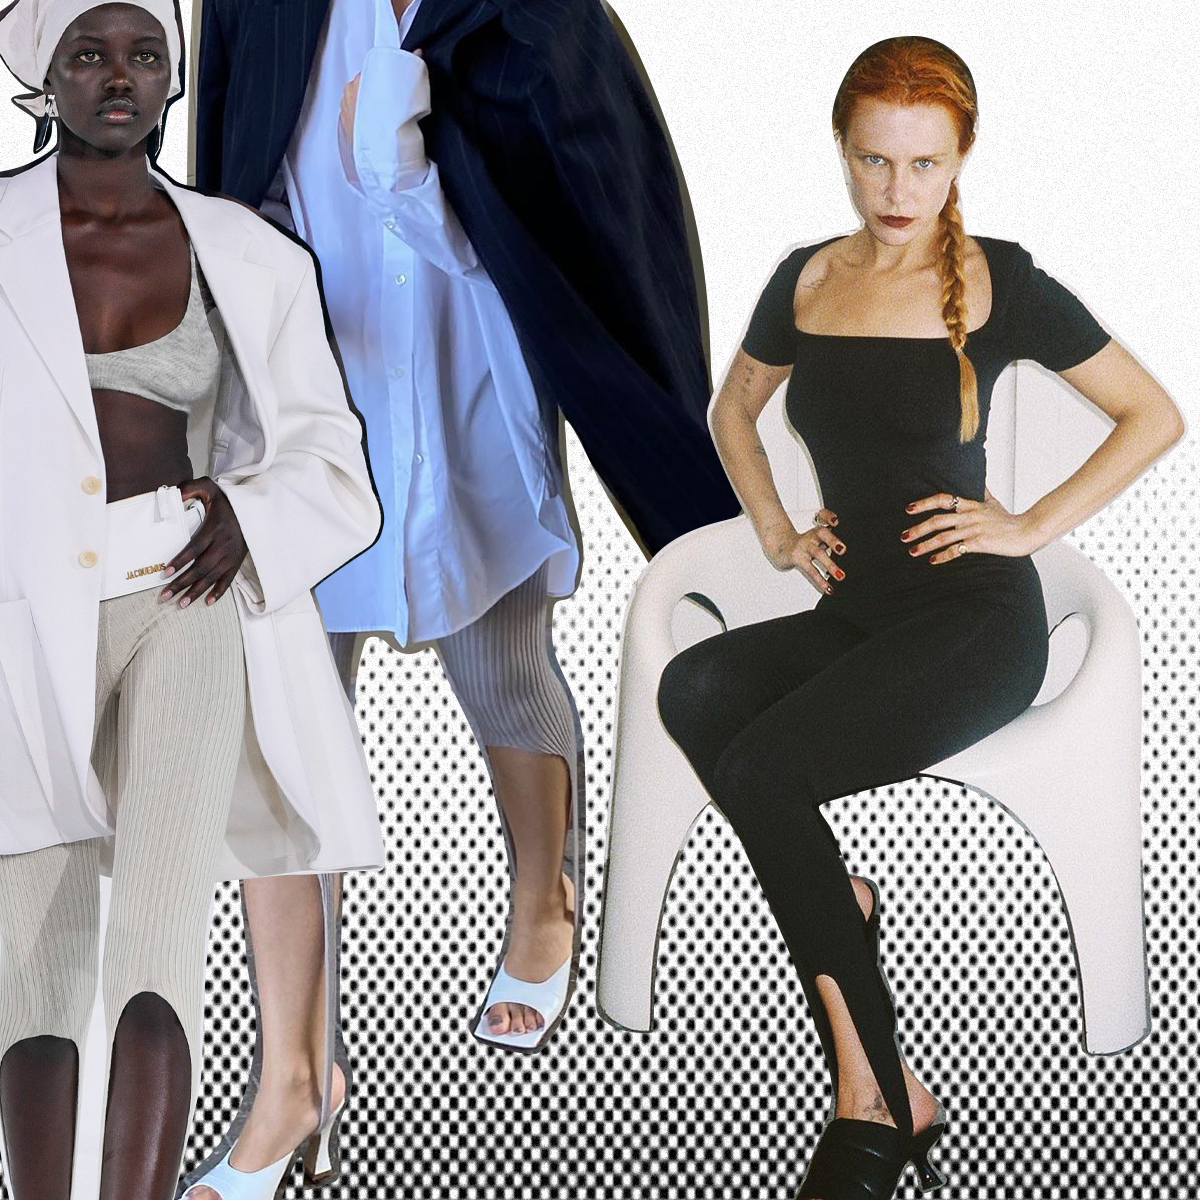 The 16 Best Stirrup Leggings That Are On-Trend for 2021